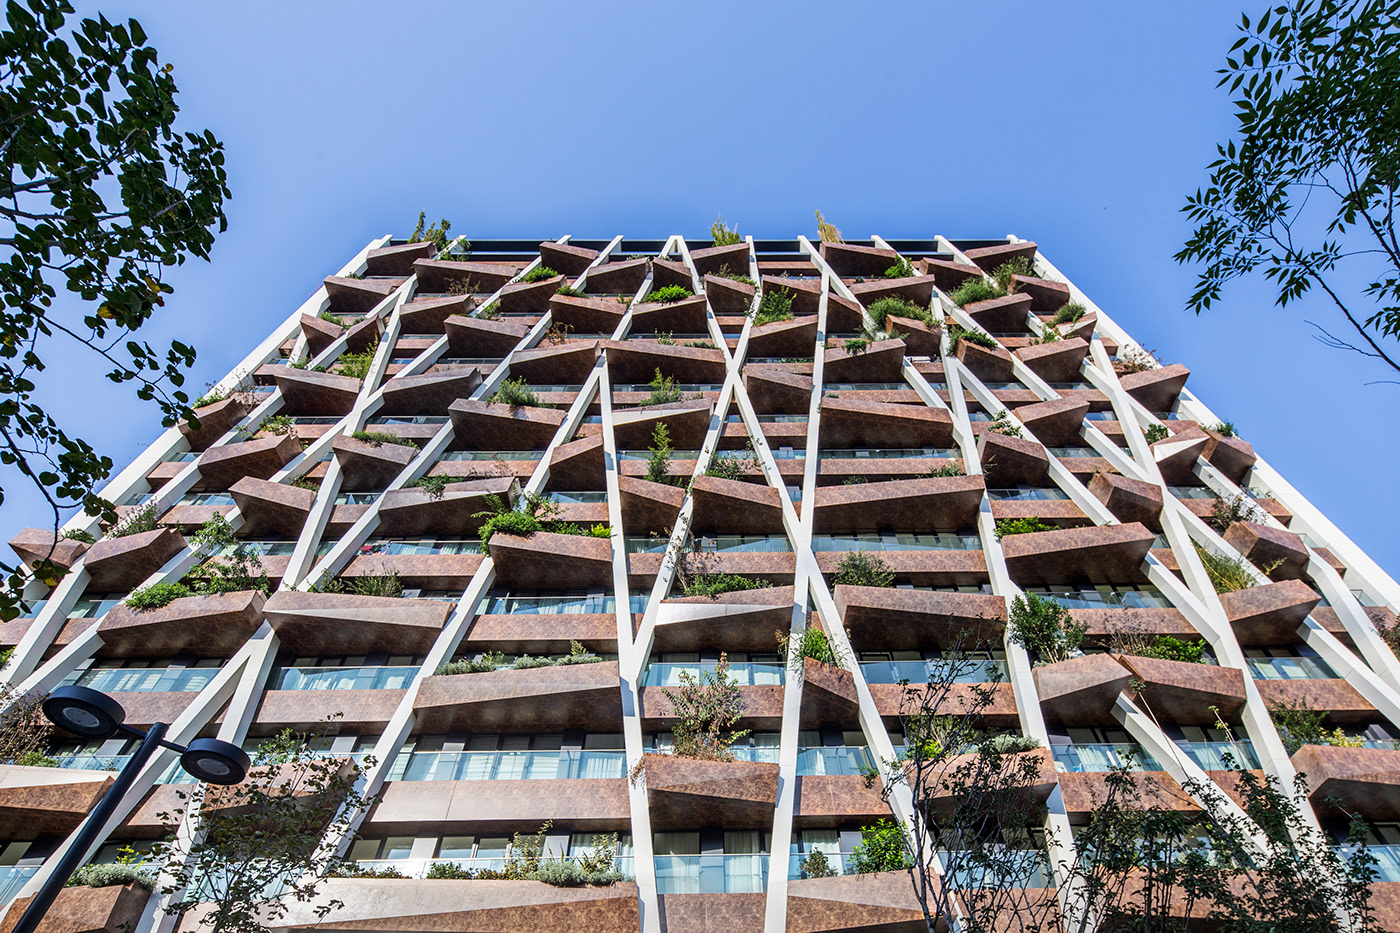 Shot of the GREENOX Residence's exterior vertical forest, as seen from the street below.